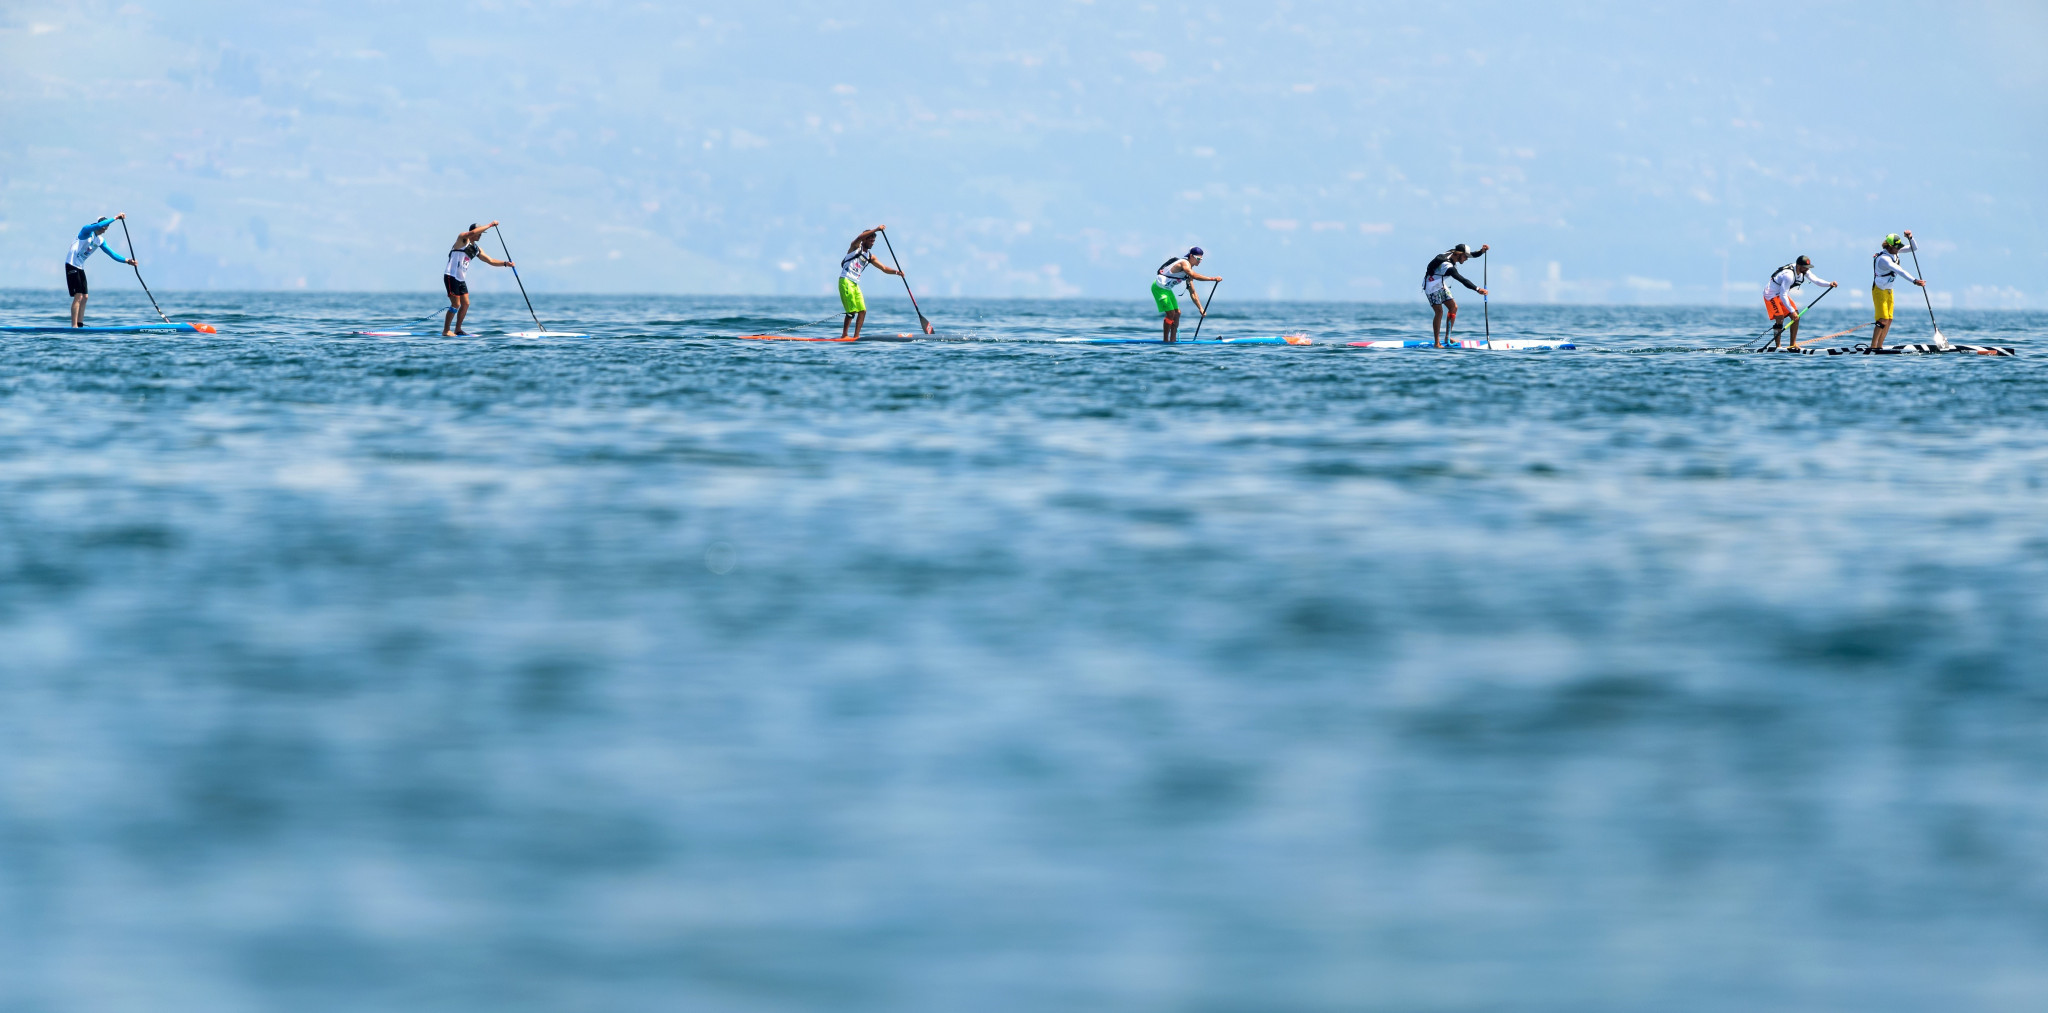 Staging the first African SUP Championships is among the initiatives outlined in the agreement  ©Getty Images